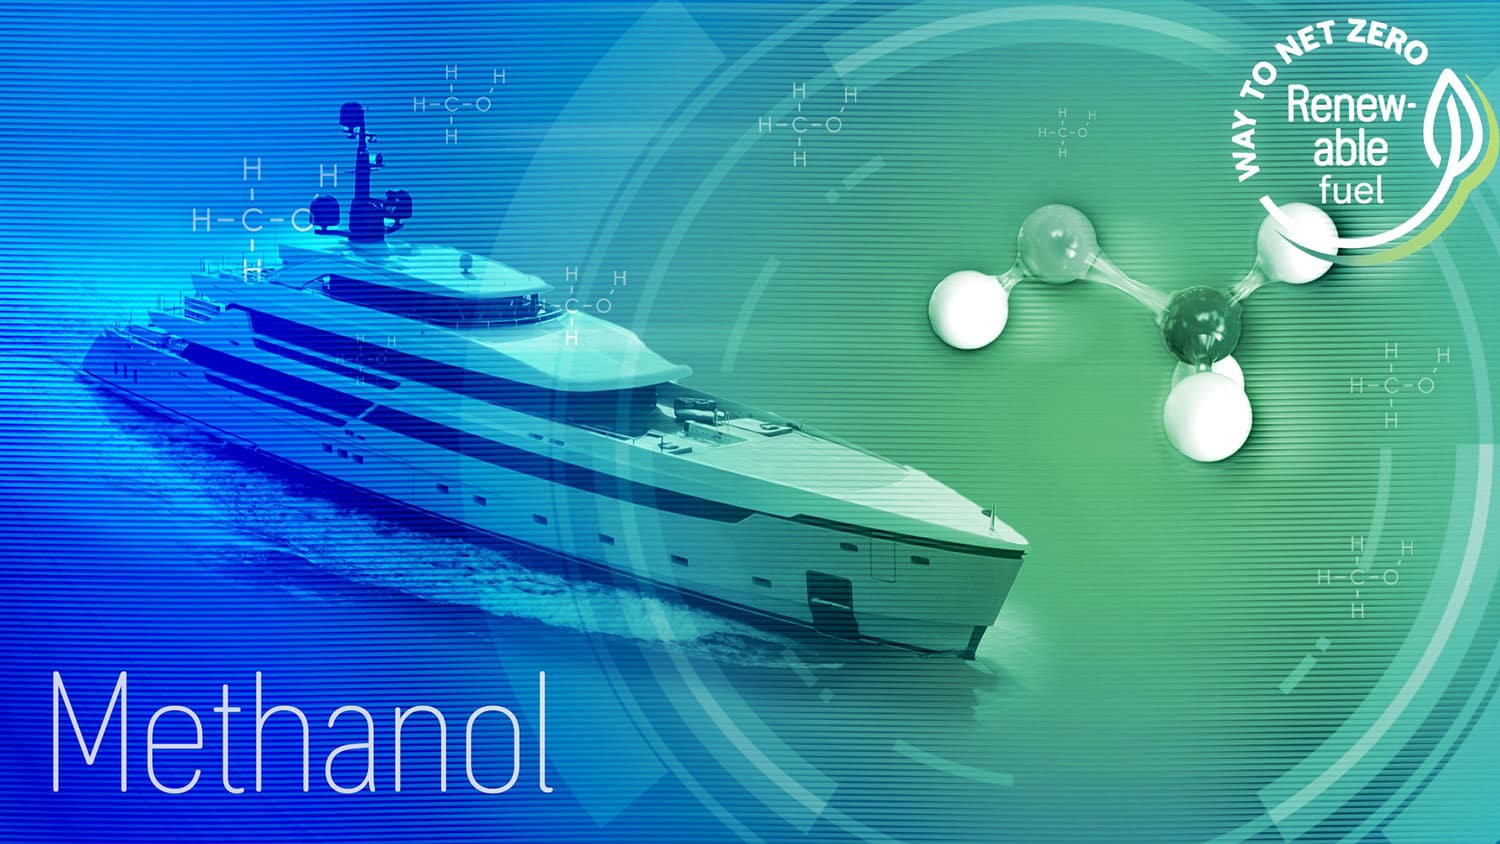 Rolls-Royce and Sanlorenzo plan to develop and build a large motor yacht with a methanol engine propulsion system.